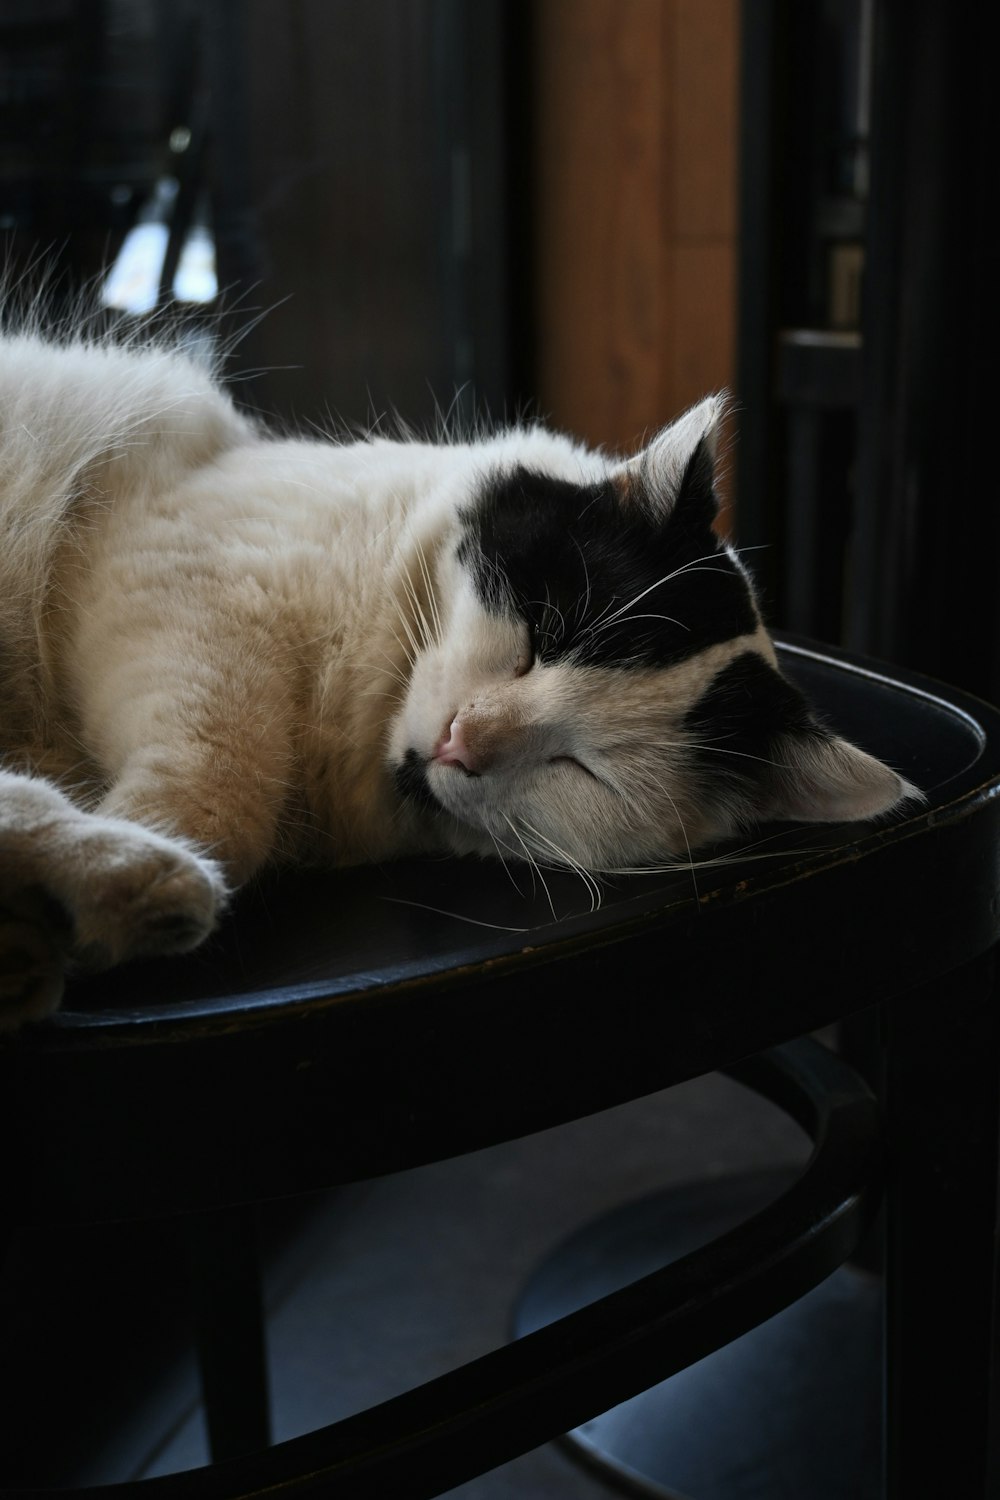 a cat sleeping on a chair